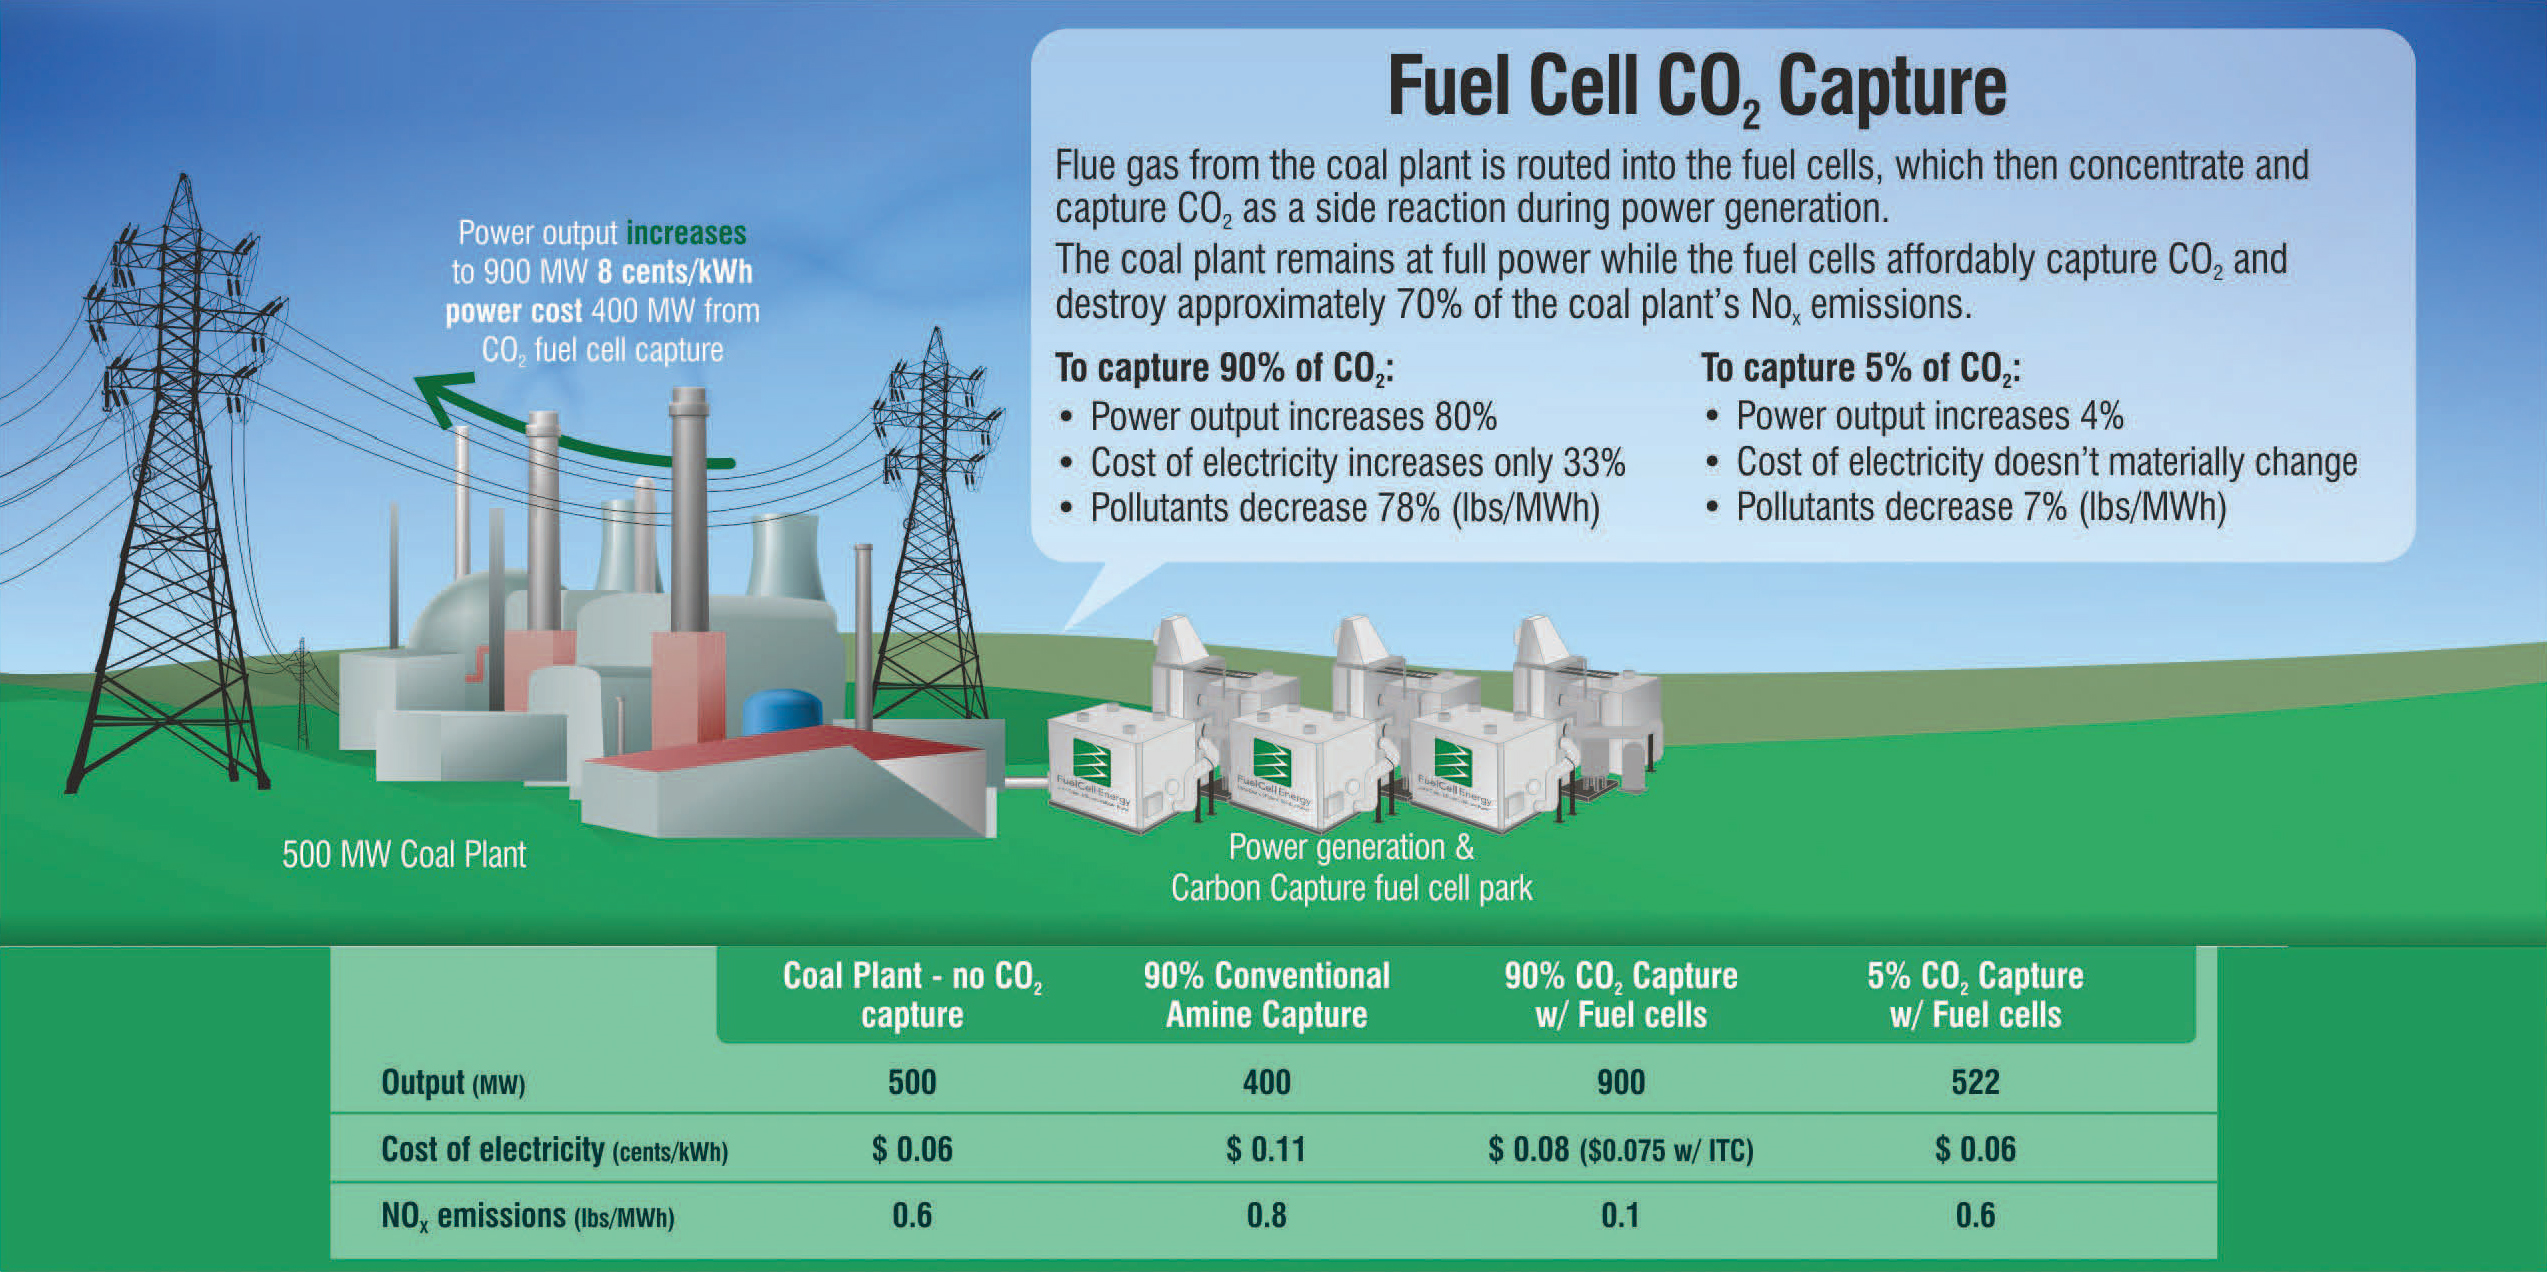 Fuel Cell Capture.jpg